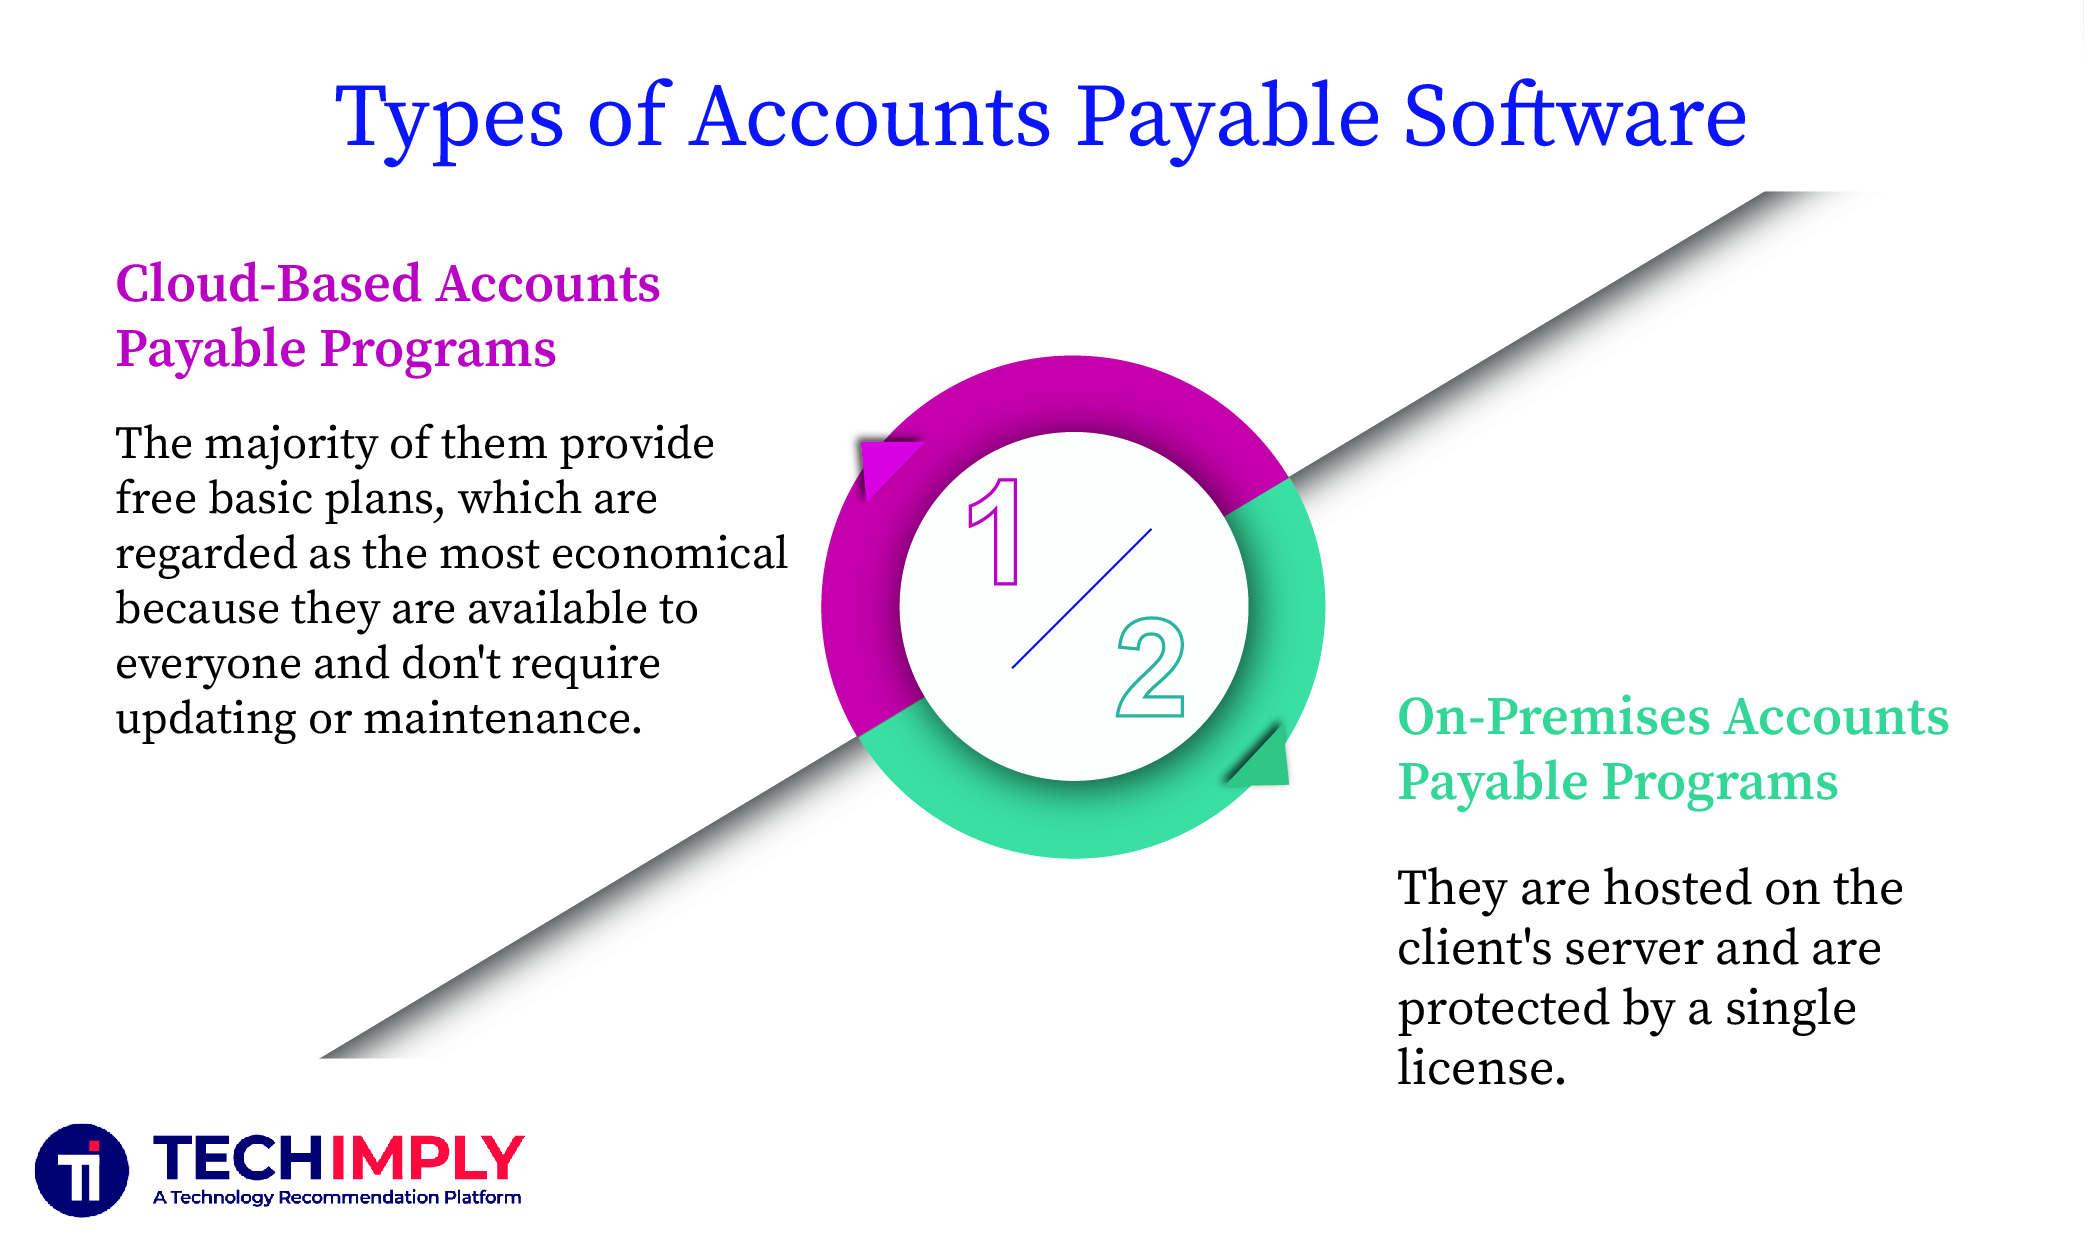 Types of Accounts Payable Software